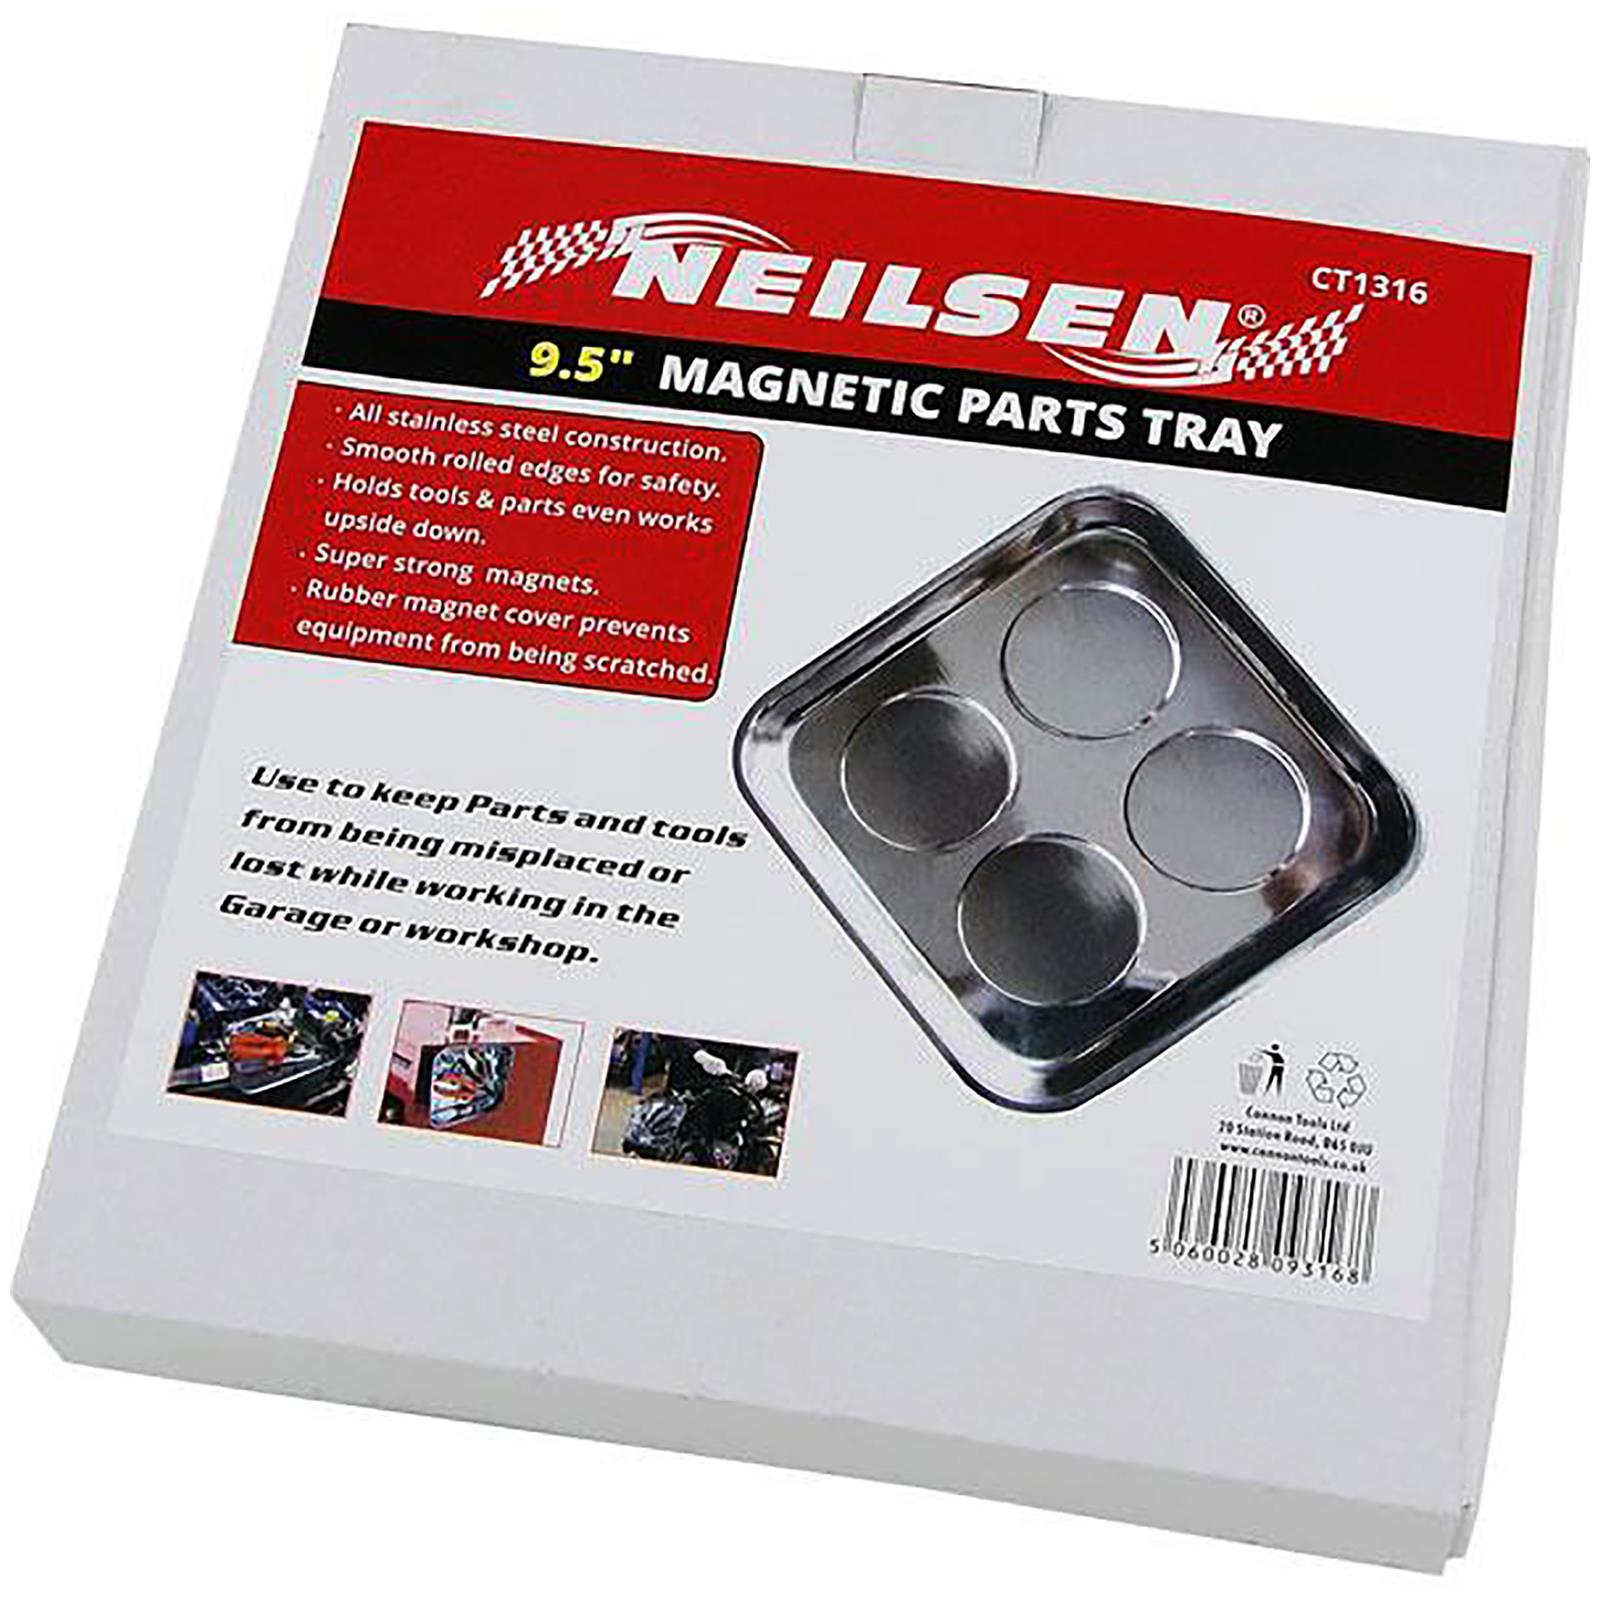 Neilsen Magnetic Parts Tray Nuts Bolts Garage Workshop Stainless Steel 9.5